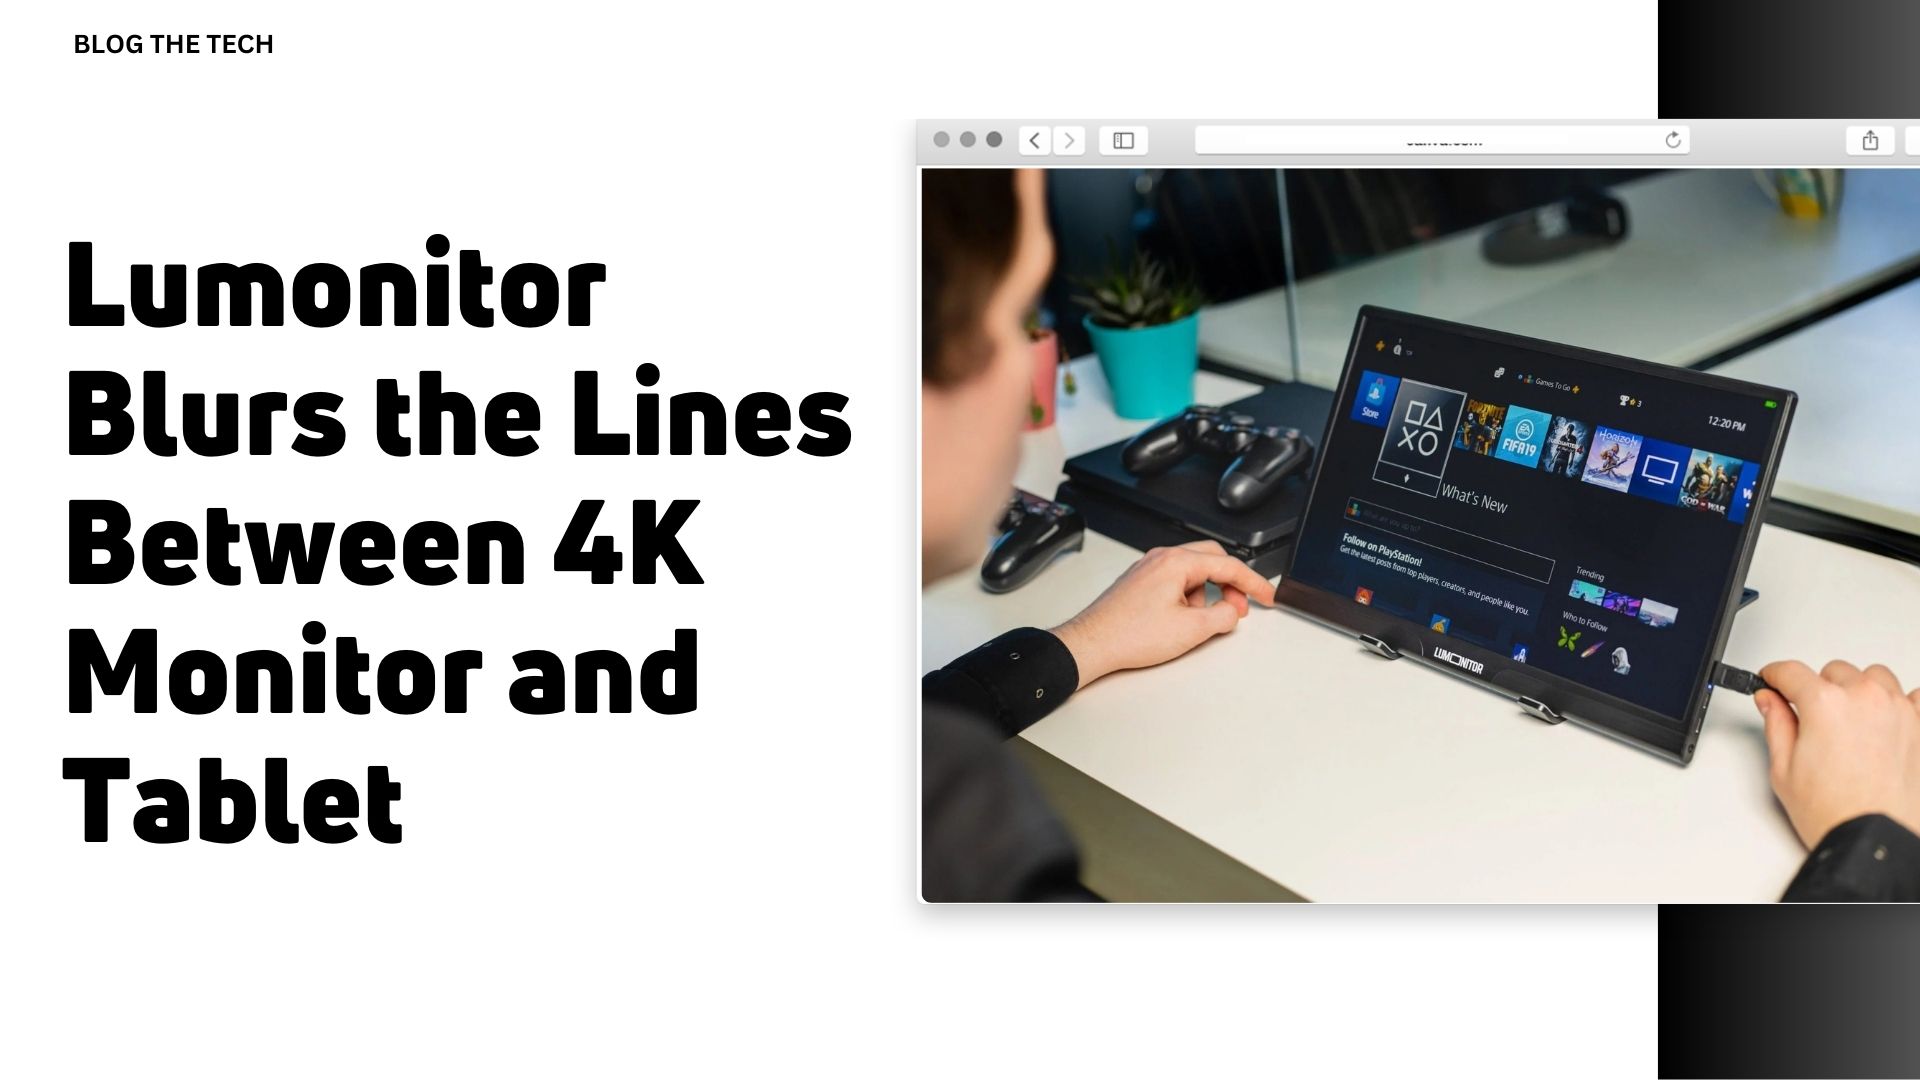 Lumonitor-Blurs-the-Lines-Between-4K-Monitor-and-Tablet-Featured